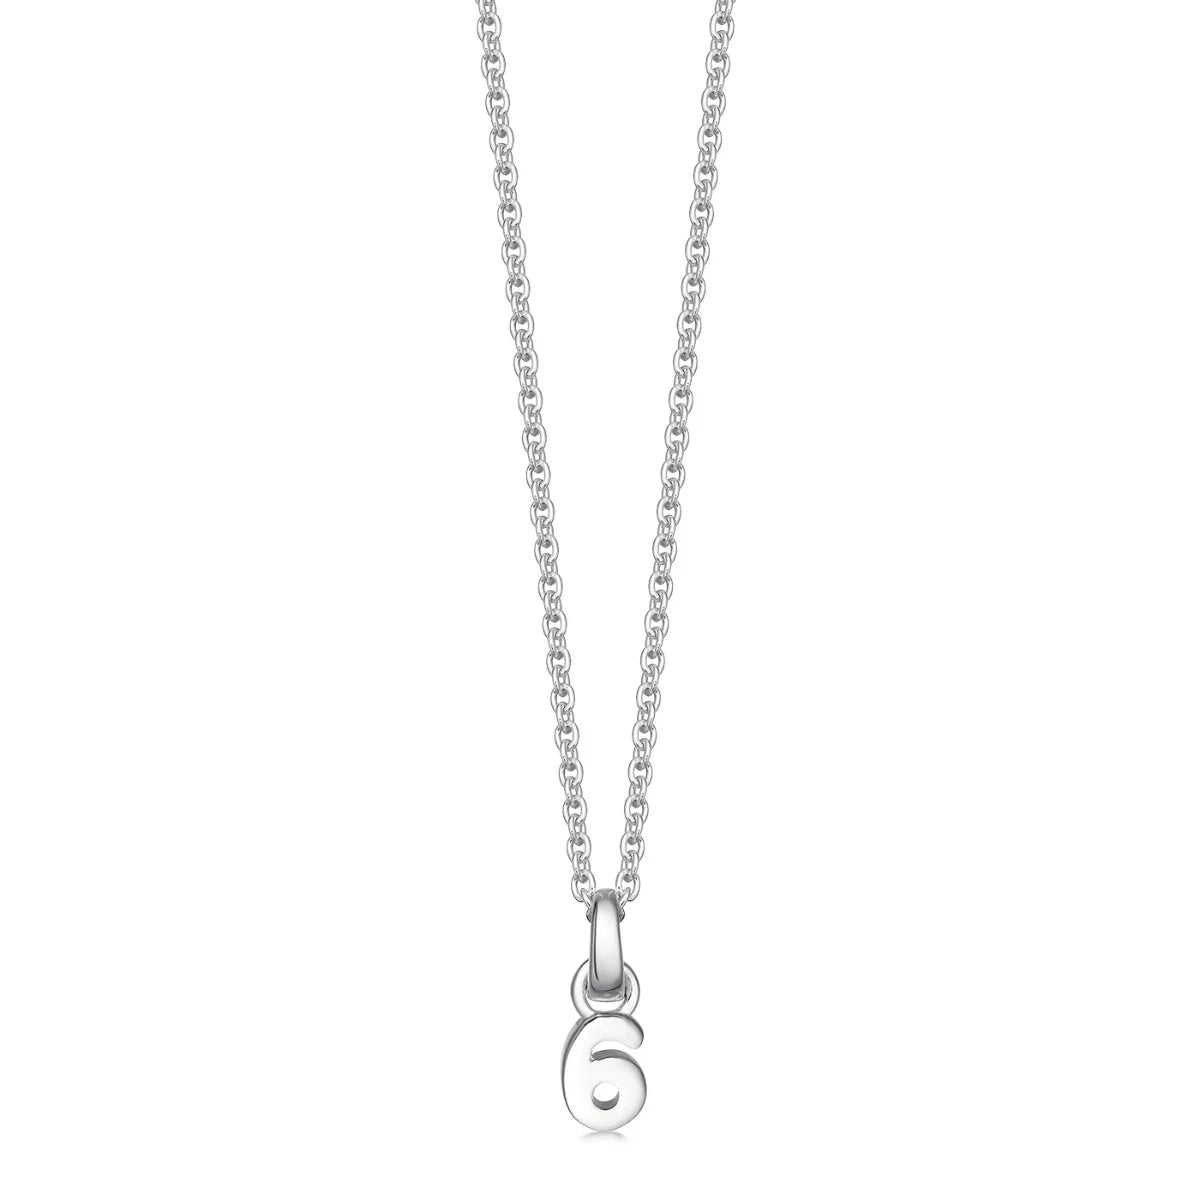 Silver Number Necklace